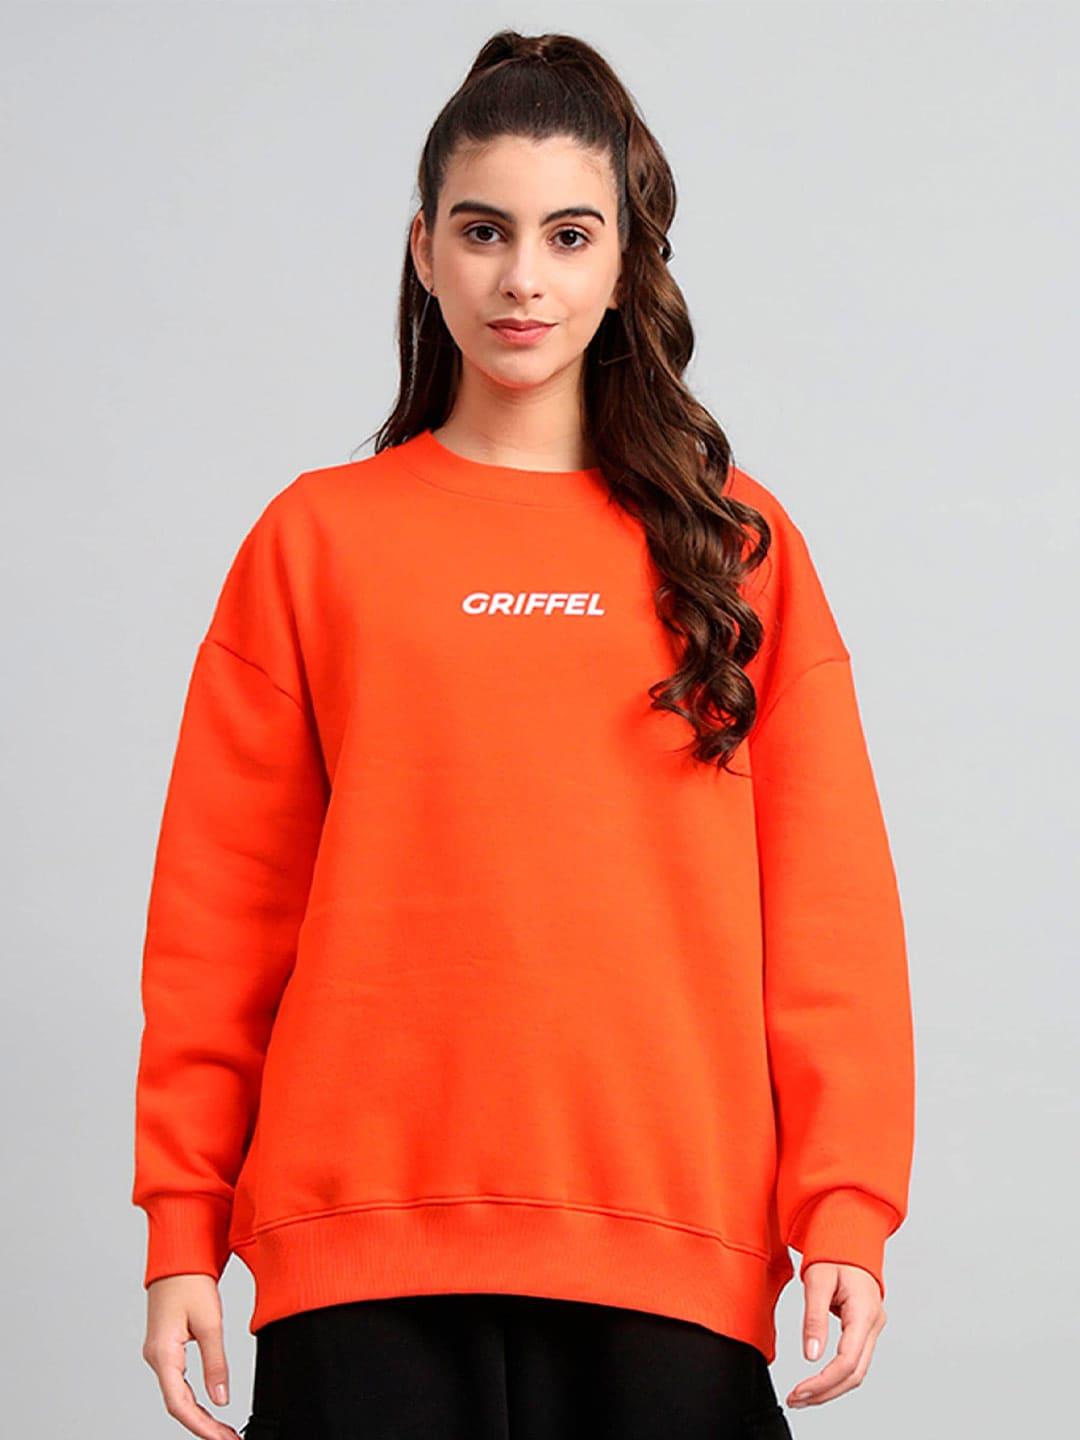 GRIFFEL Typography Printed Fleece Pullover